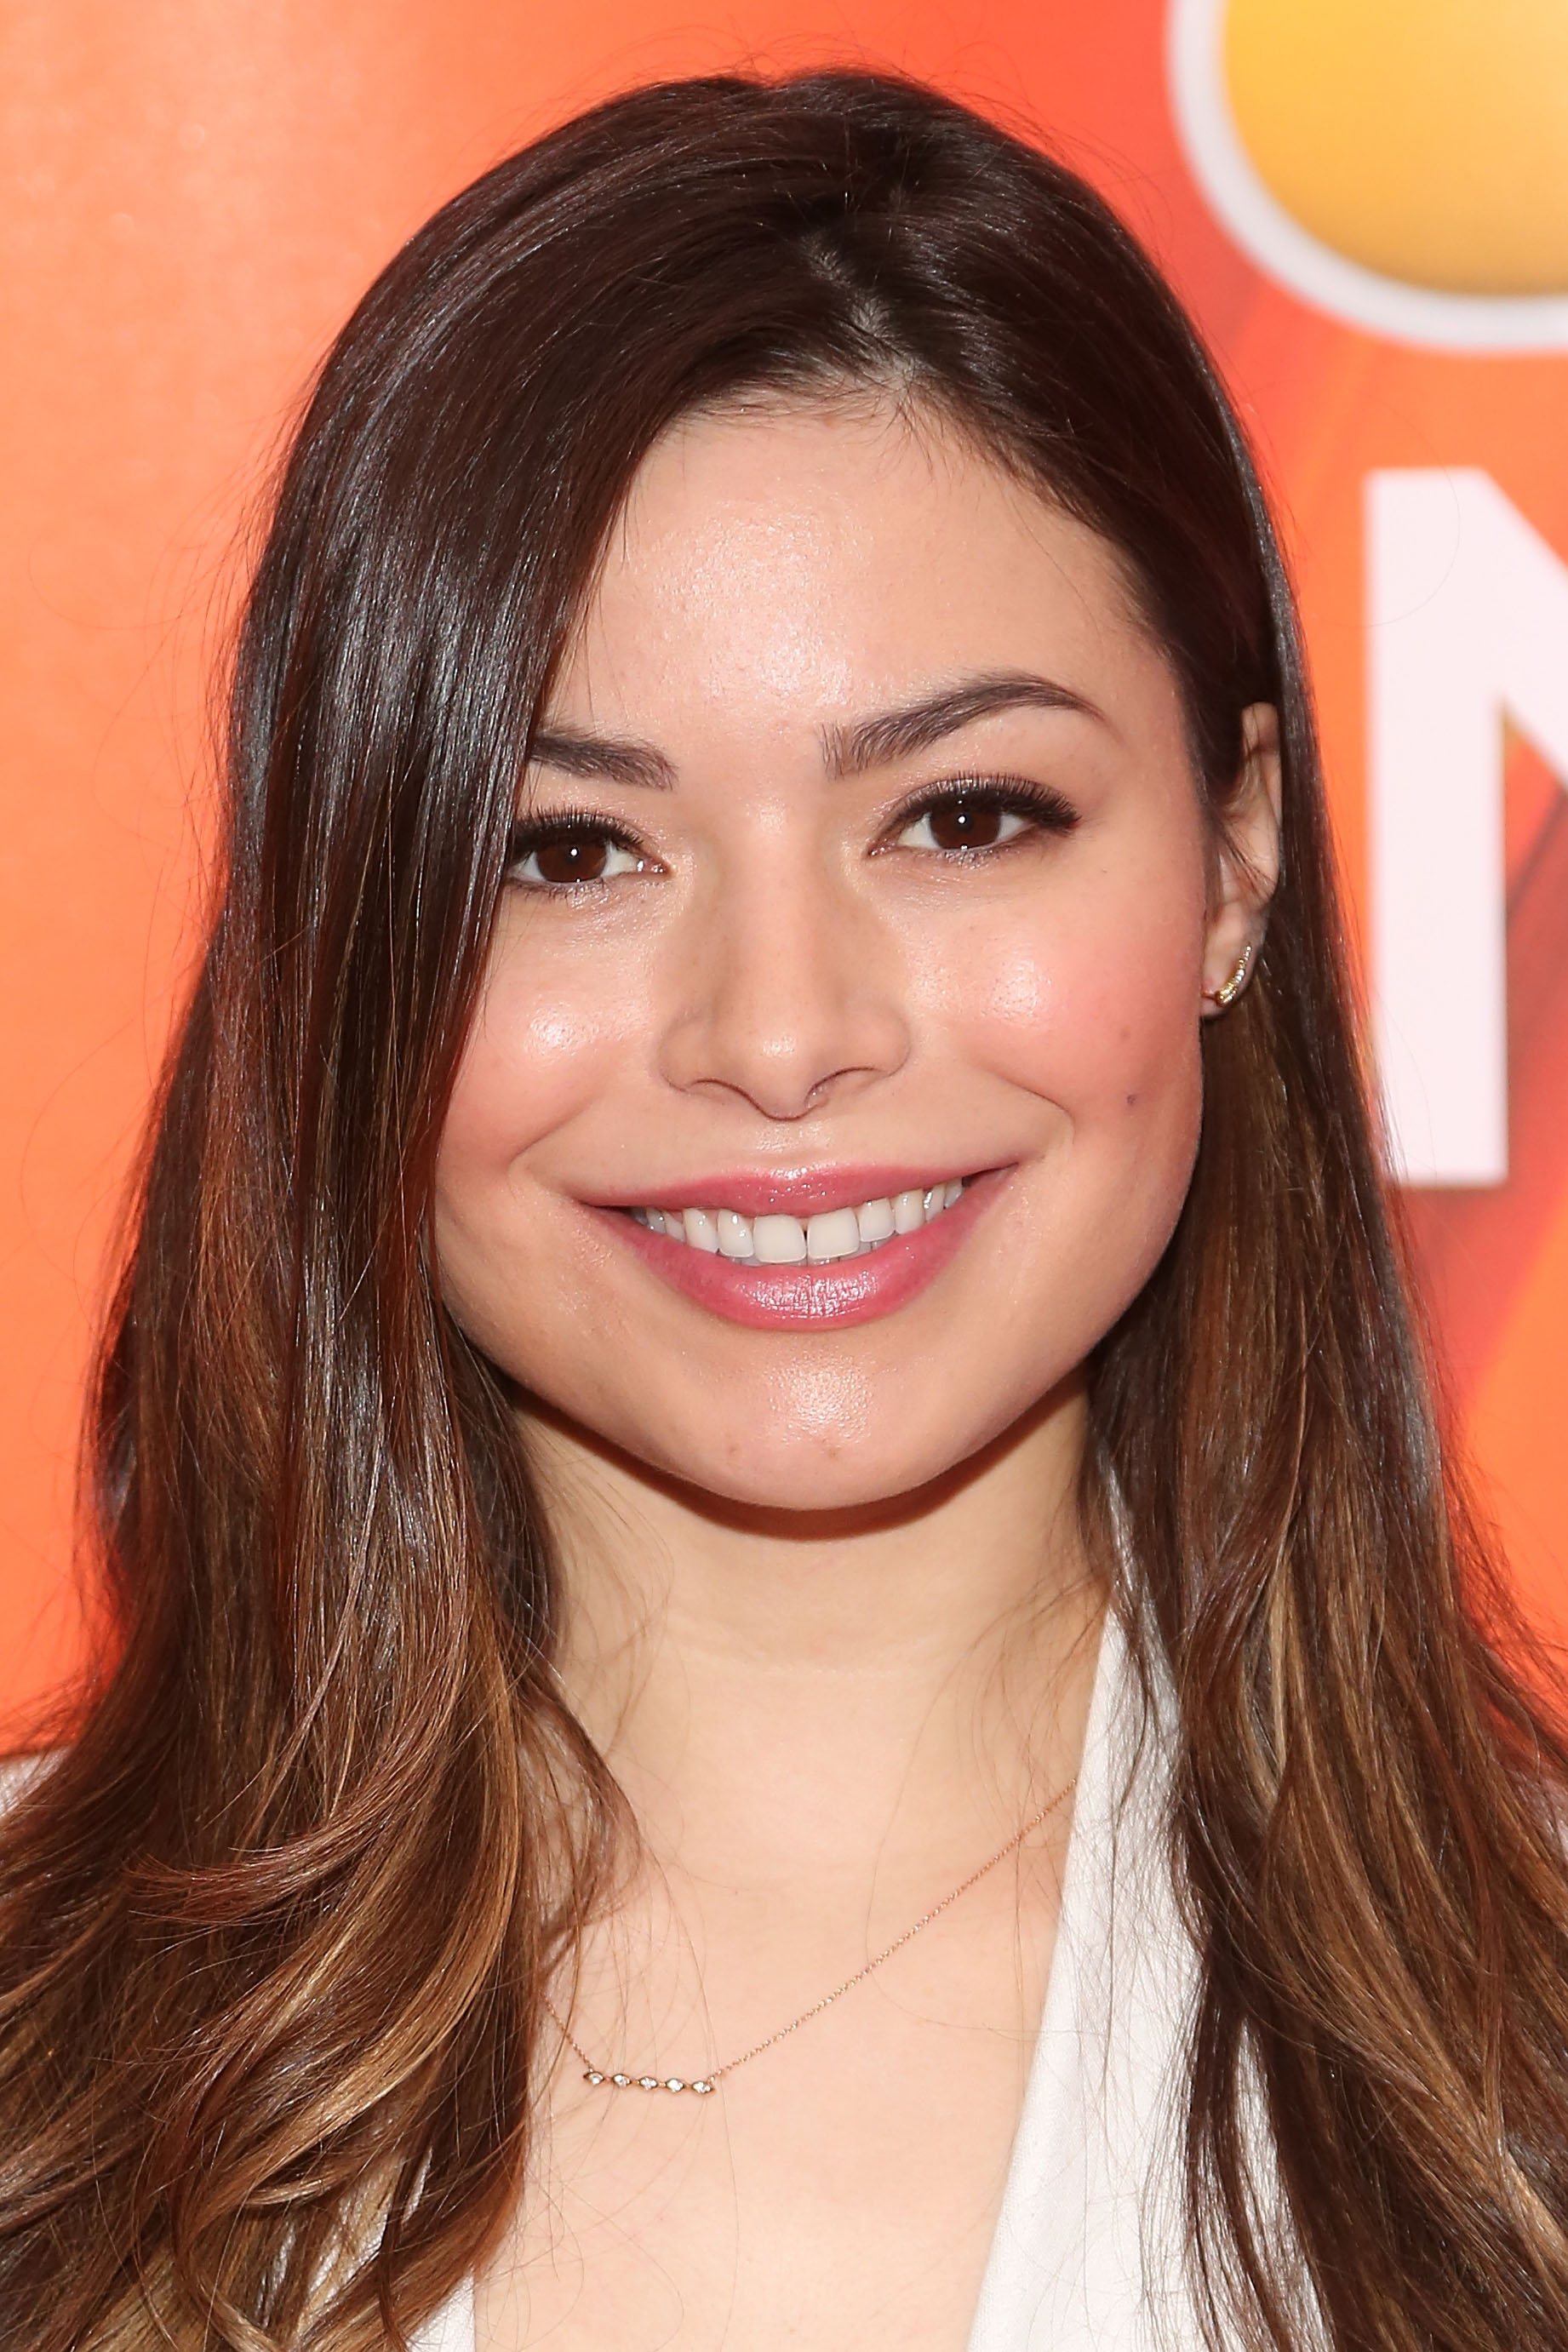 The hottest images and pictures of miranda cosgrove are a thing of admirati...